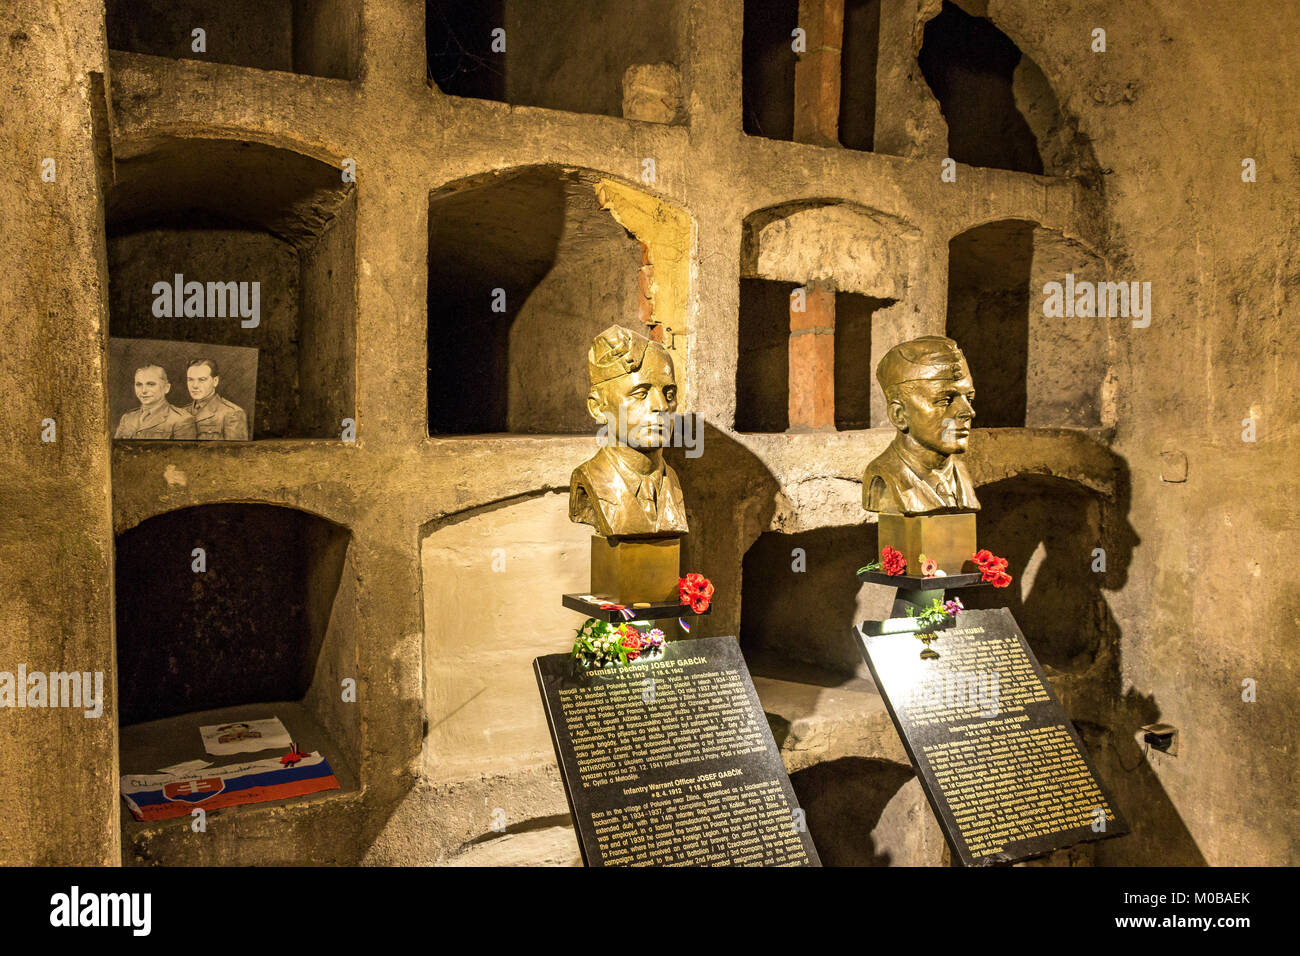 Busts of Jan Kubiš and Jozef Gabčík who were killed in the Crypt of St  Cyrils Church Prague after the assassination of Reinhardt Heydrich in1942  Stock Photo - Alamy